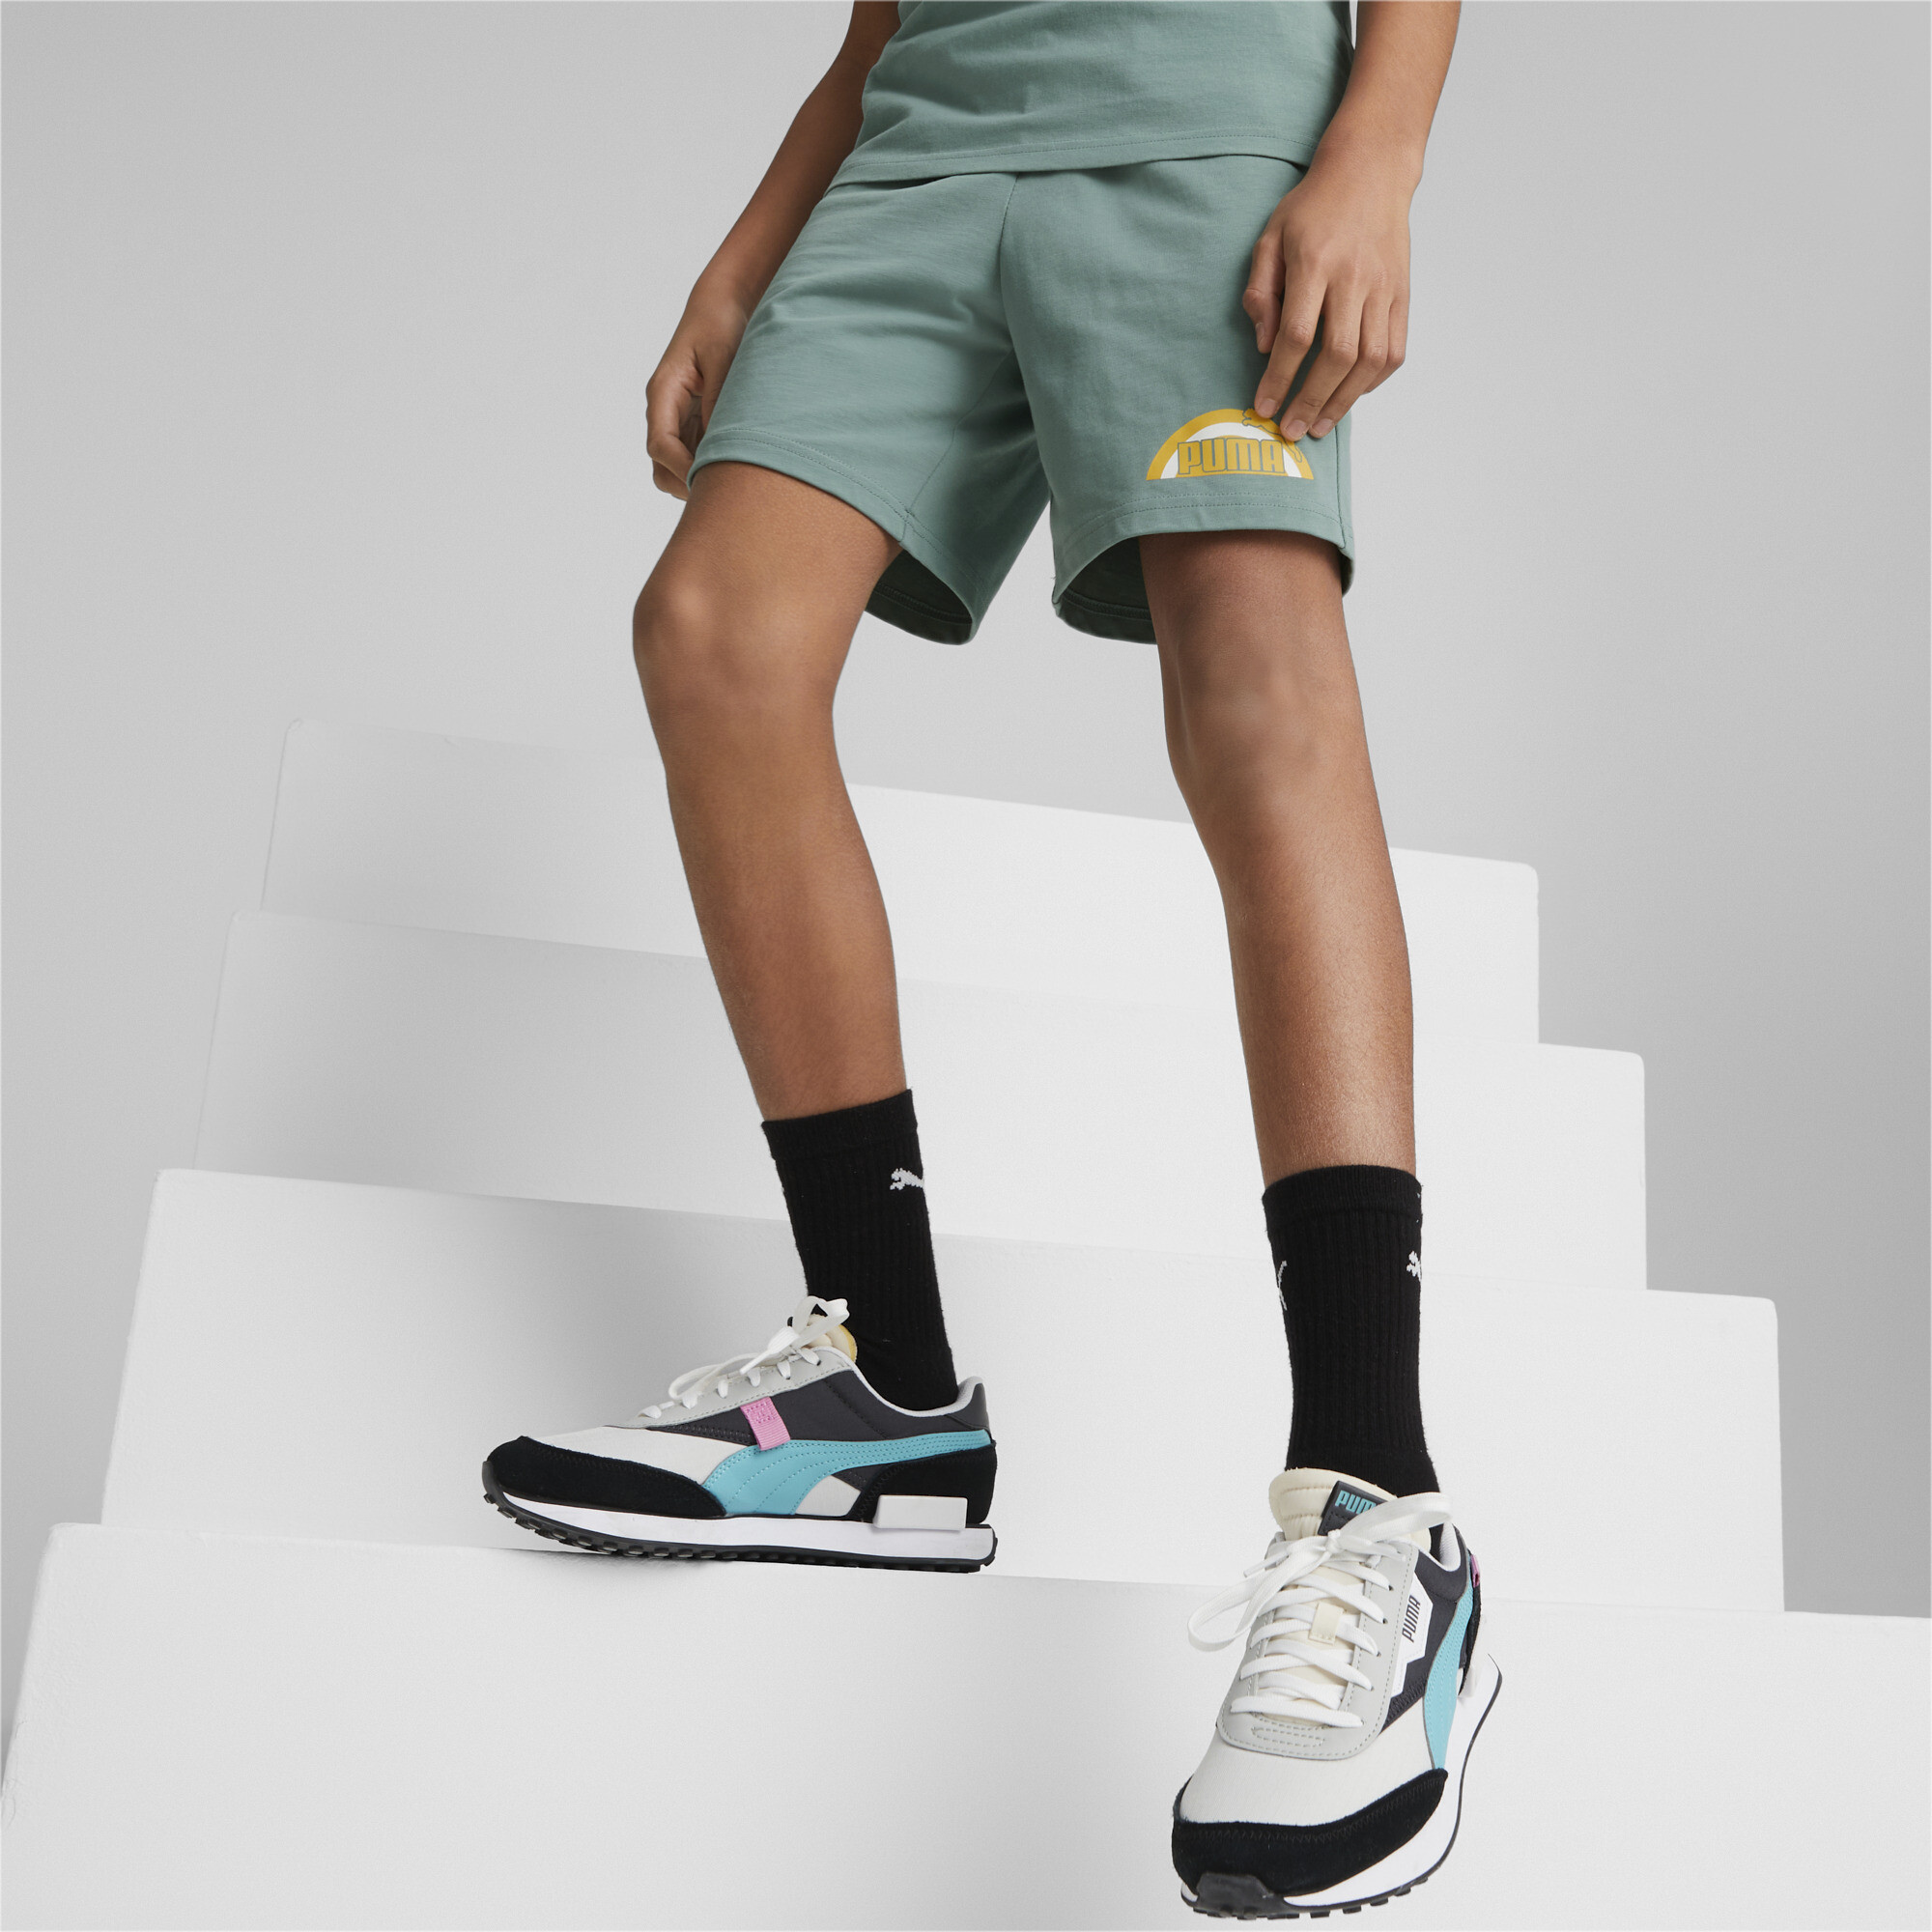 PUMA Essentials+ Street Art Shorts In Gray, Size 3-4 Youth